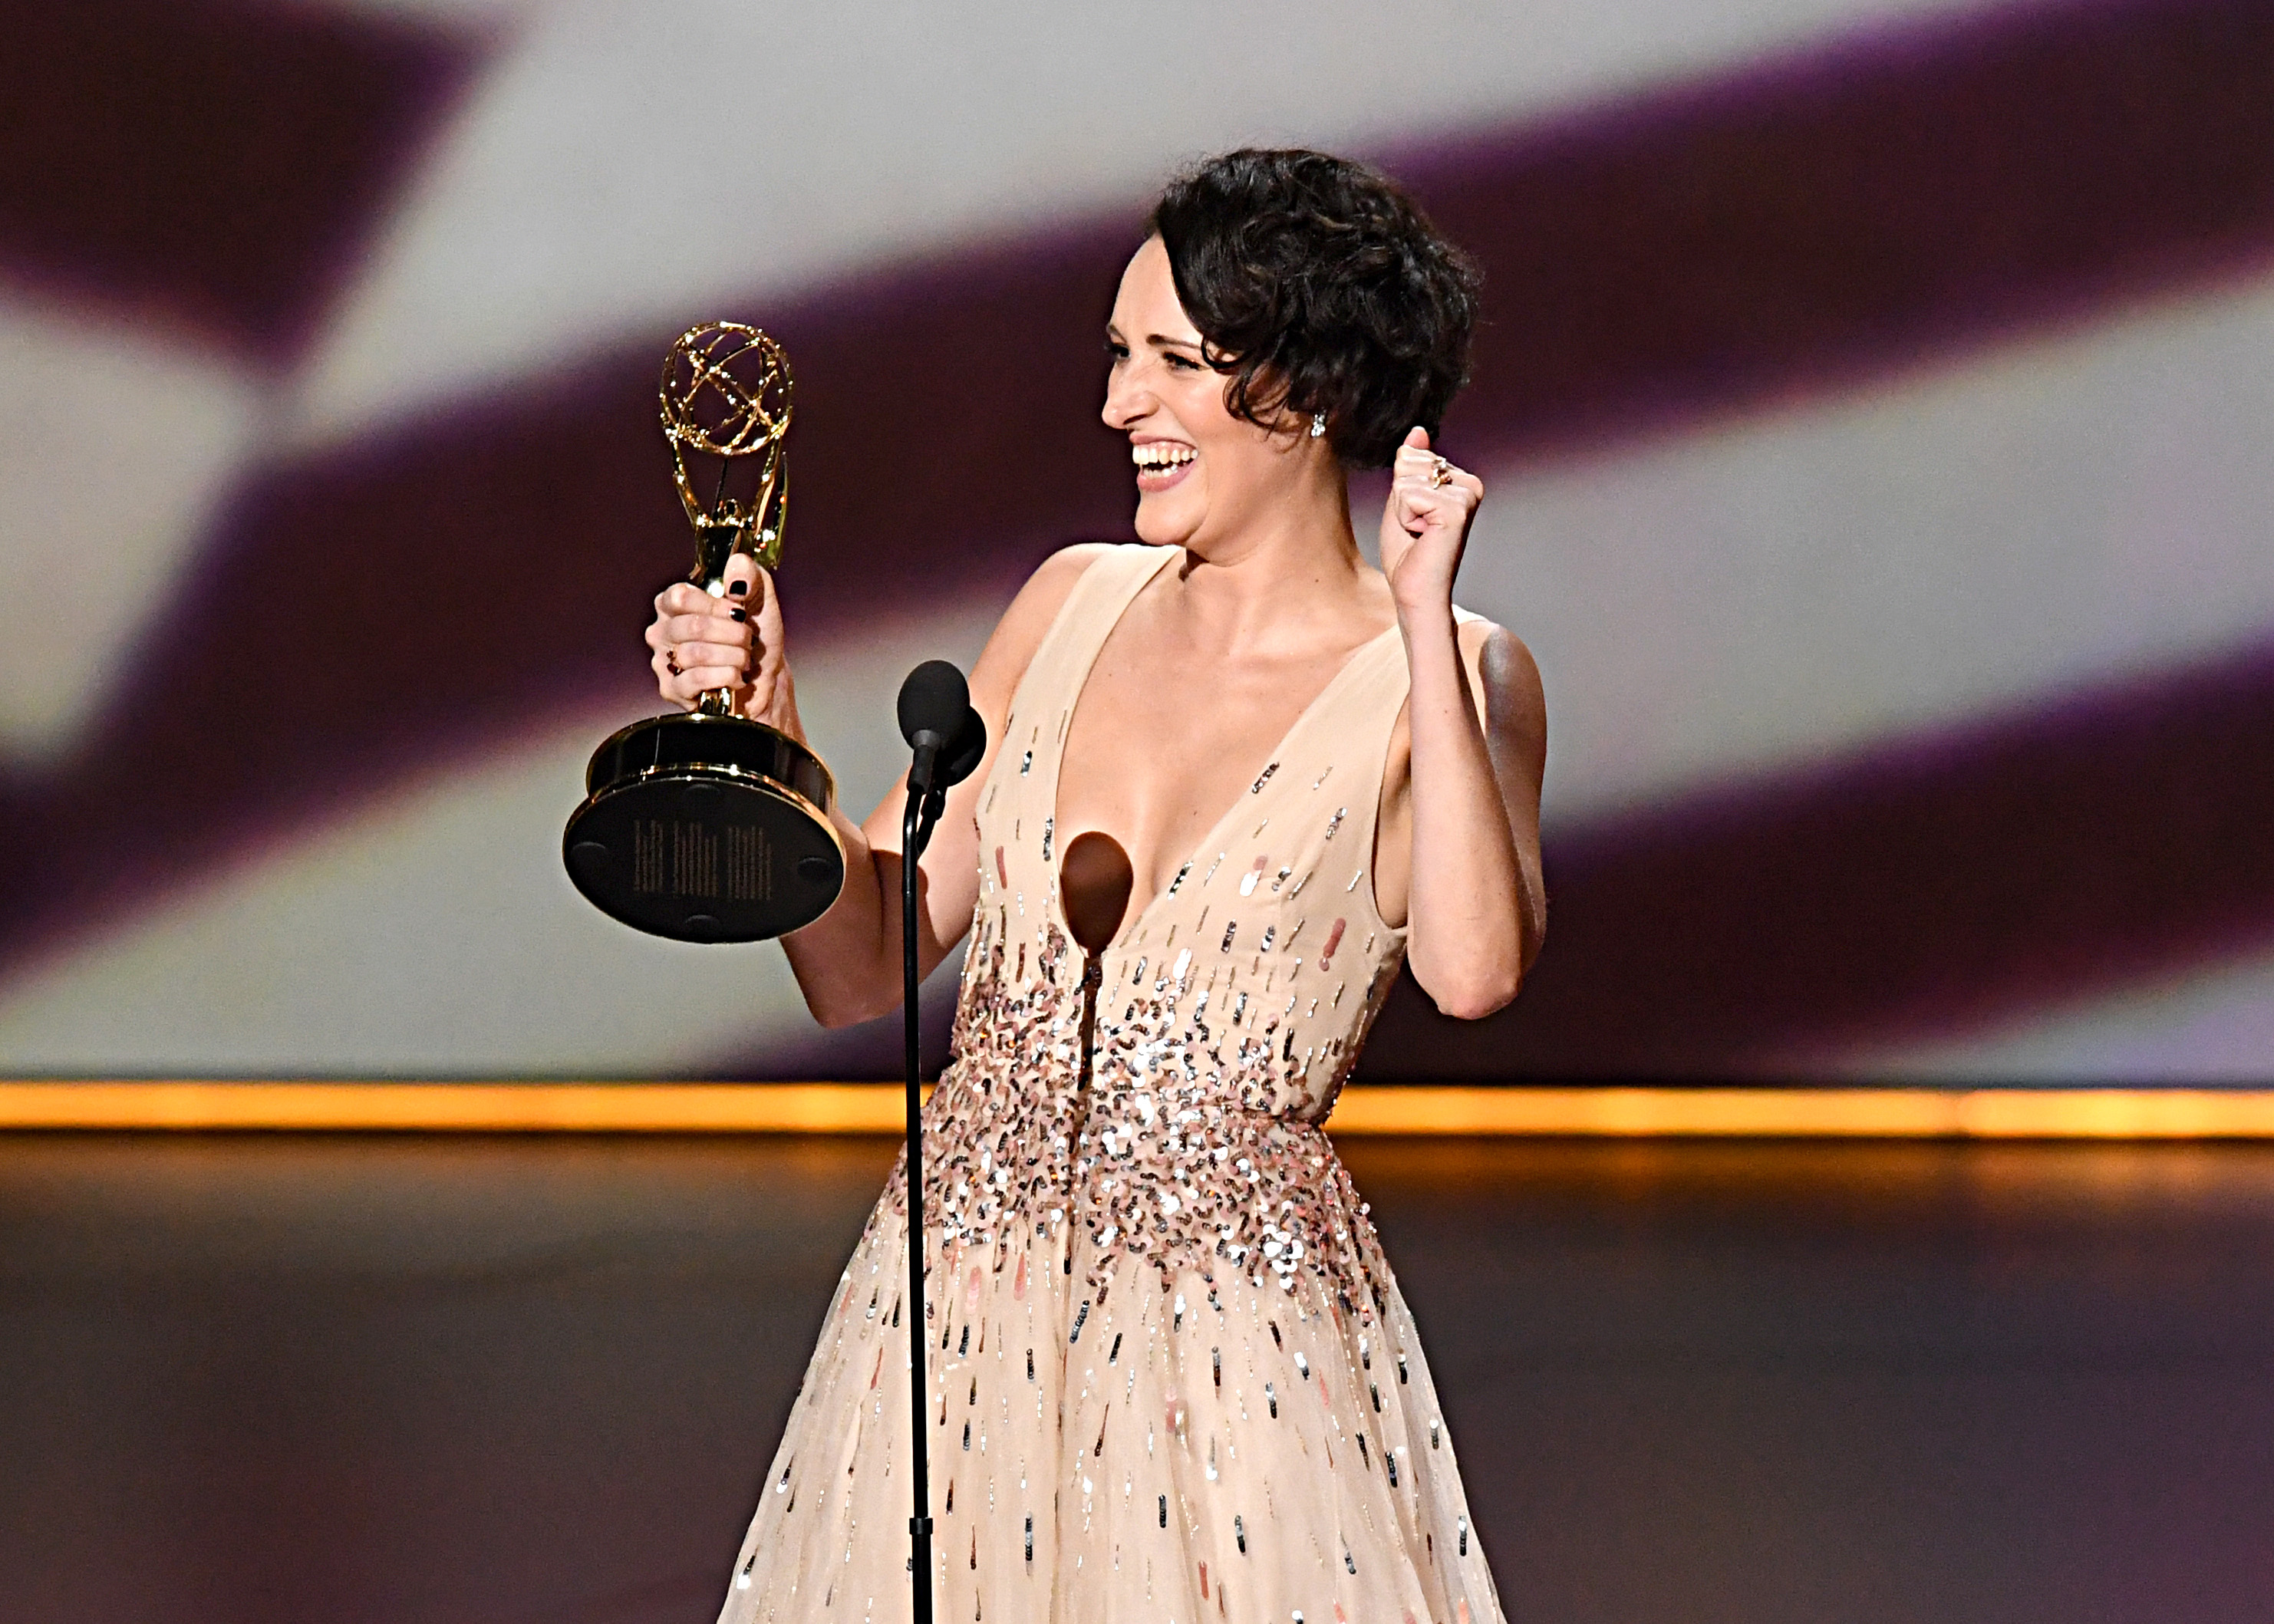 LOS ANGELES, CALIFORNIA - SEPTEMBER 22: Phoebe Waller-Bridge accepts the Outstanding Writing for a Comedy Series award for “Fleabag” onstage during the 71st Emmy Awards at Microsoft Theater on September 22, 2019 in Los Angeles, California. (Photo by Jeff Kravitz/FilmMagic) (Jeff Kravitz—FilmMagic)